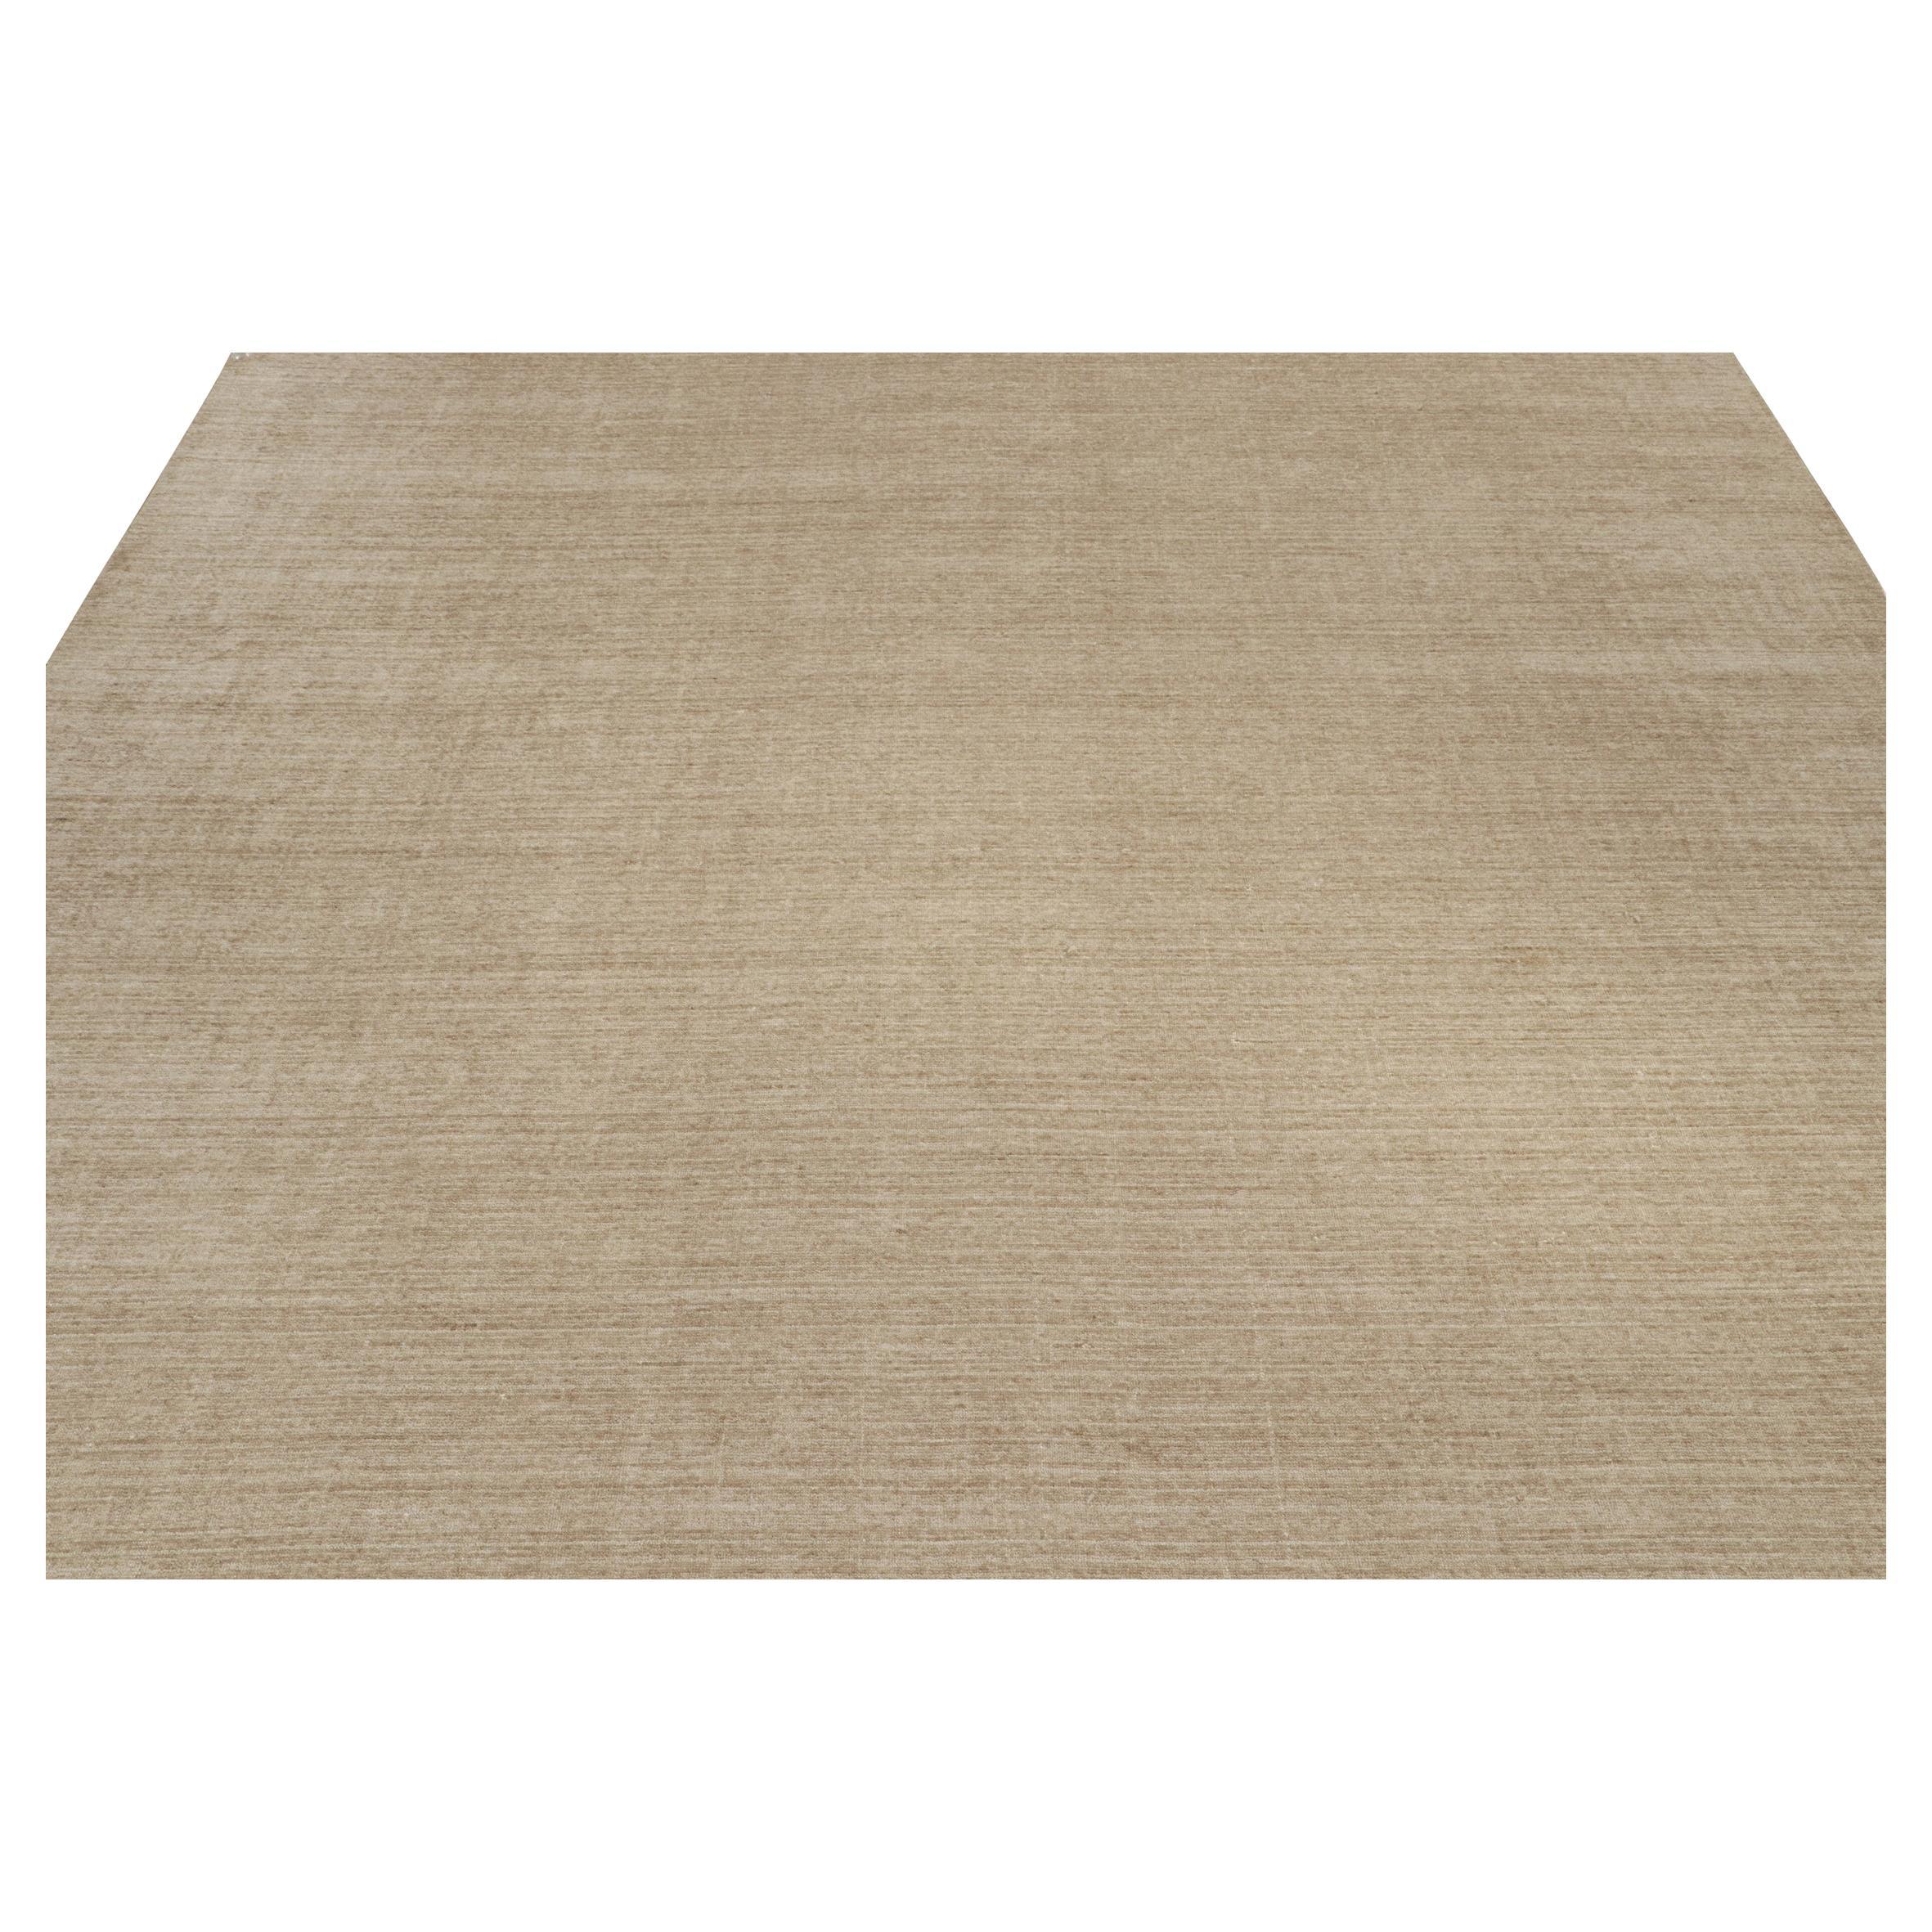 Hand-Knotted Rug & Kilim’s Plain Modern Rug in Beige-Brown Tone-on-Tone For Sale